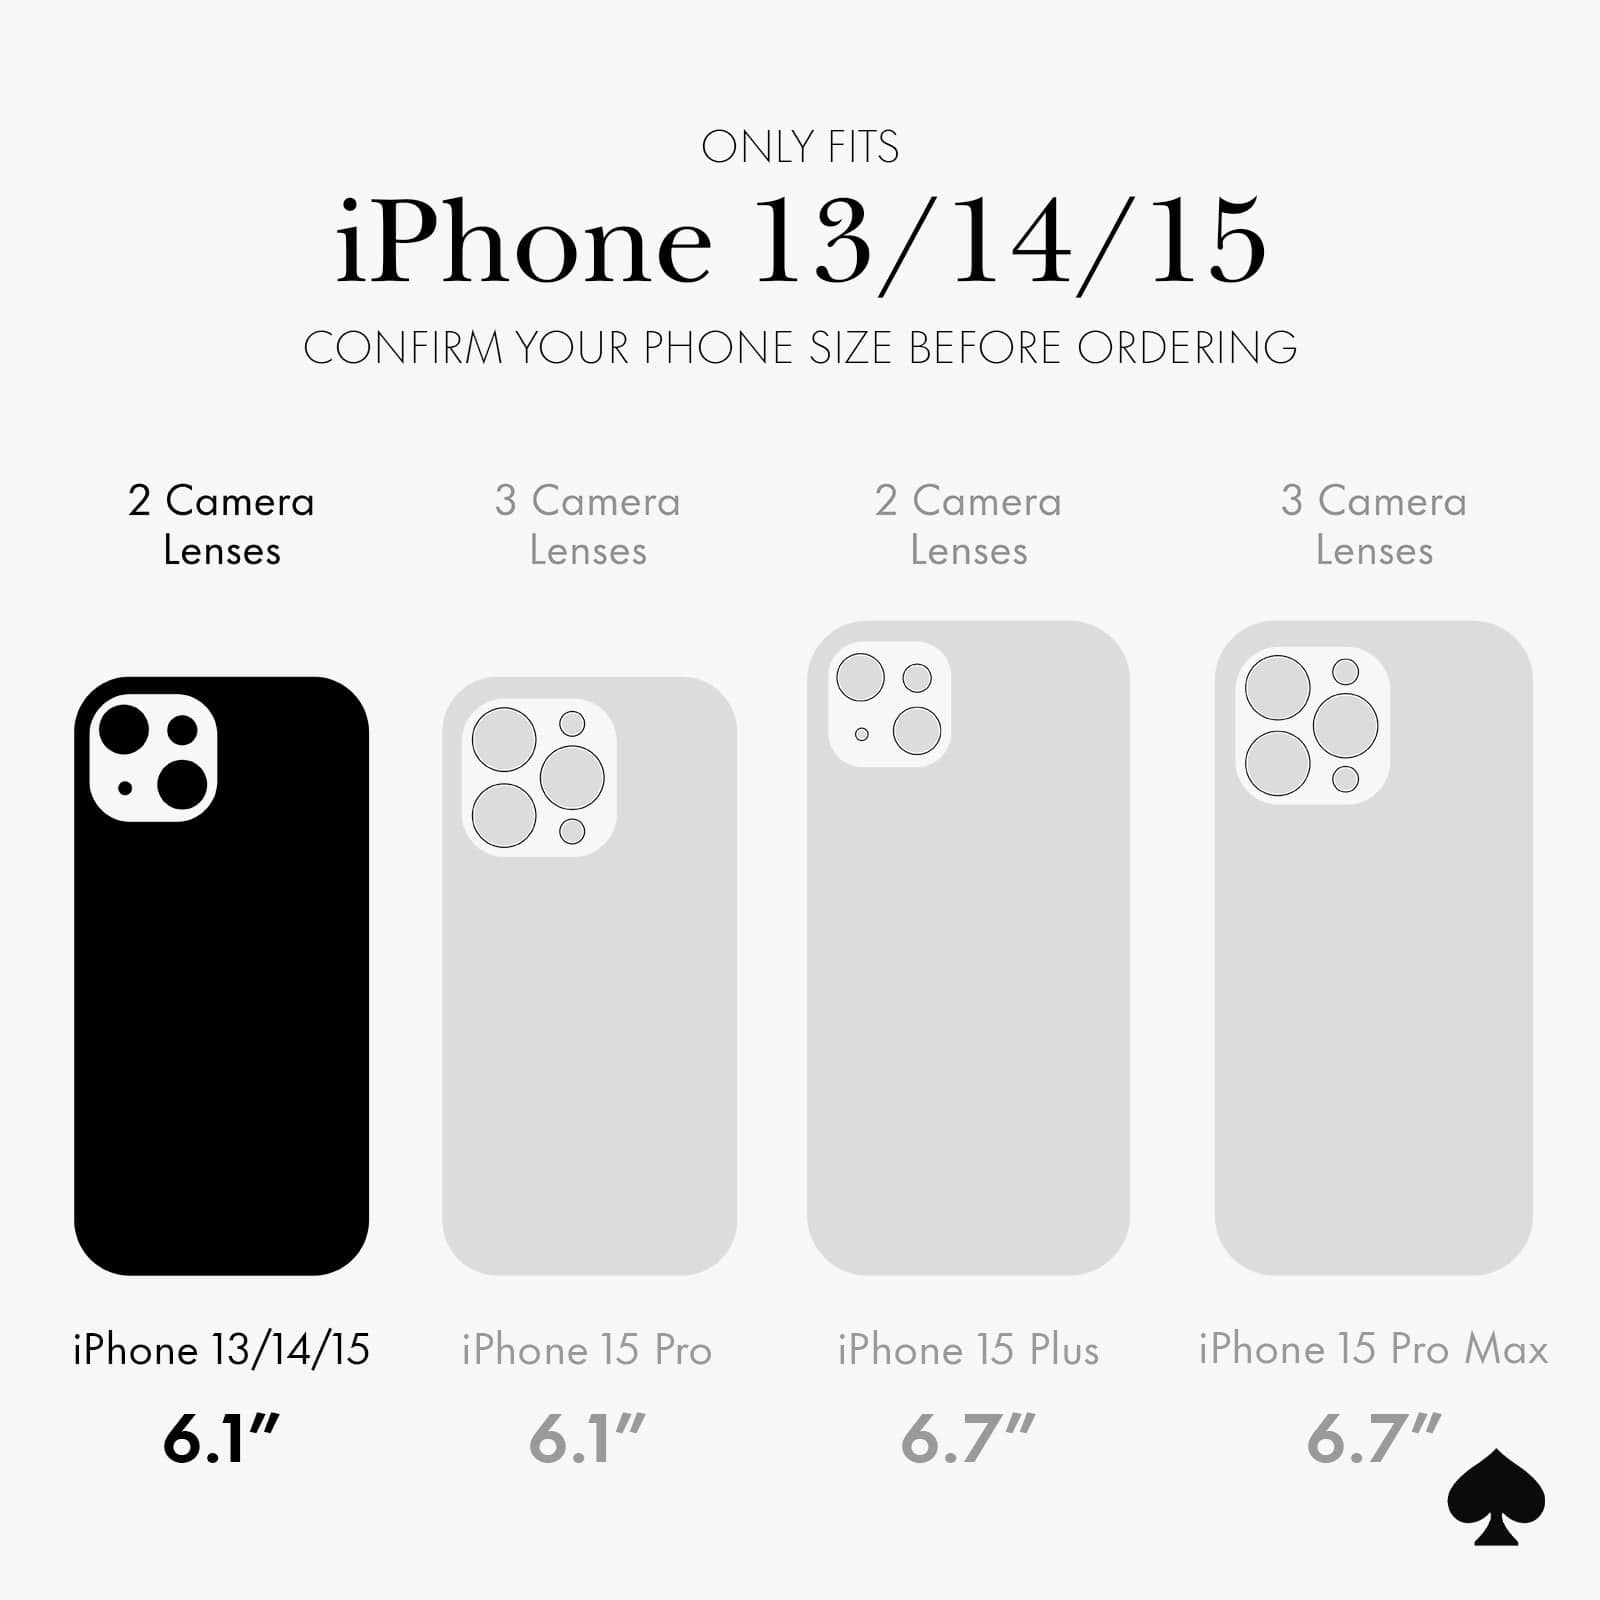 ONLY FITS IPHONE 15 CONFIRM YOUR PHONE SIZE BEFORE ORDERING